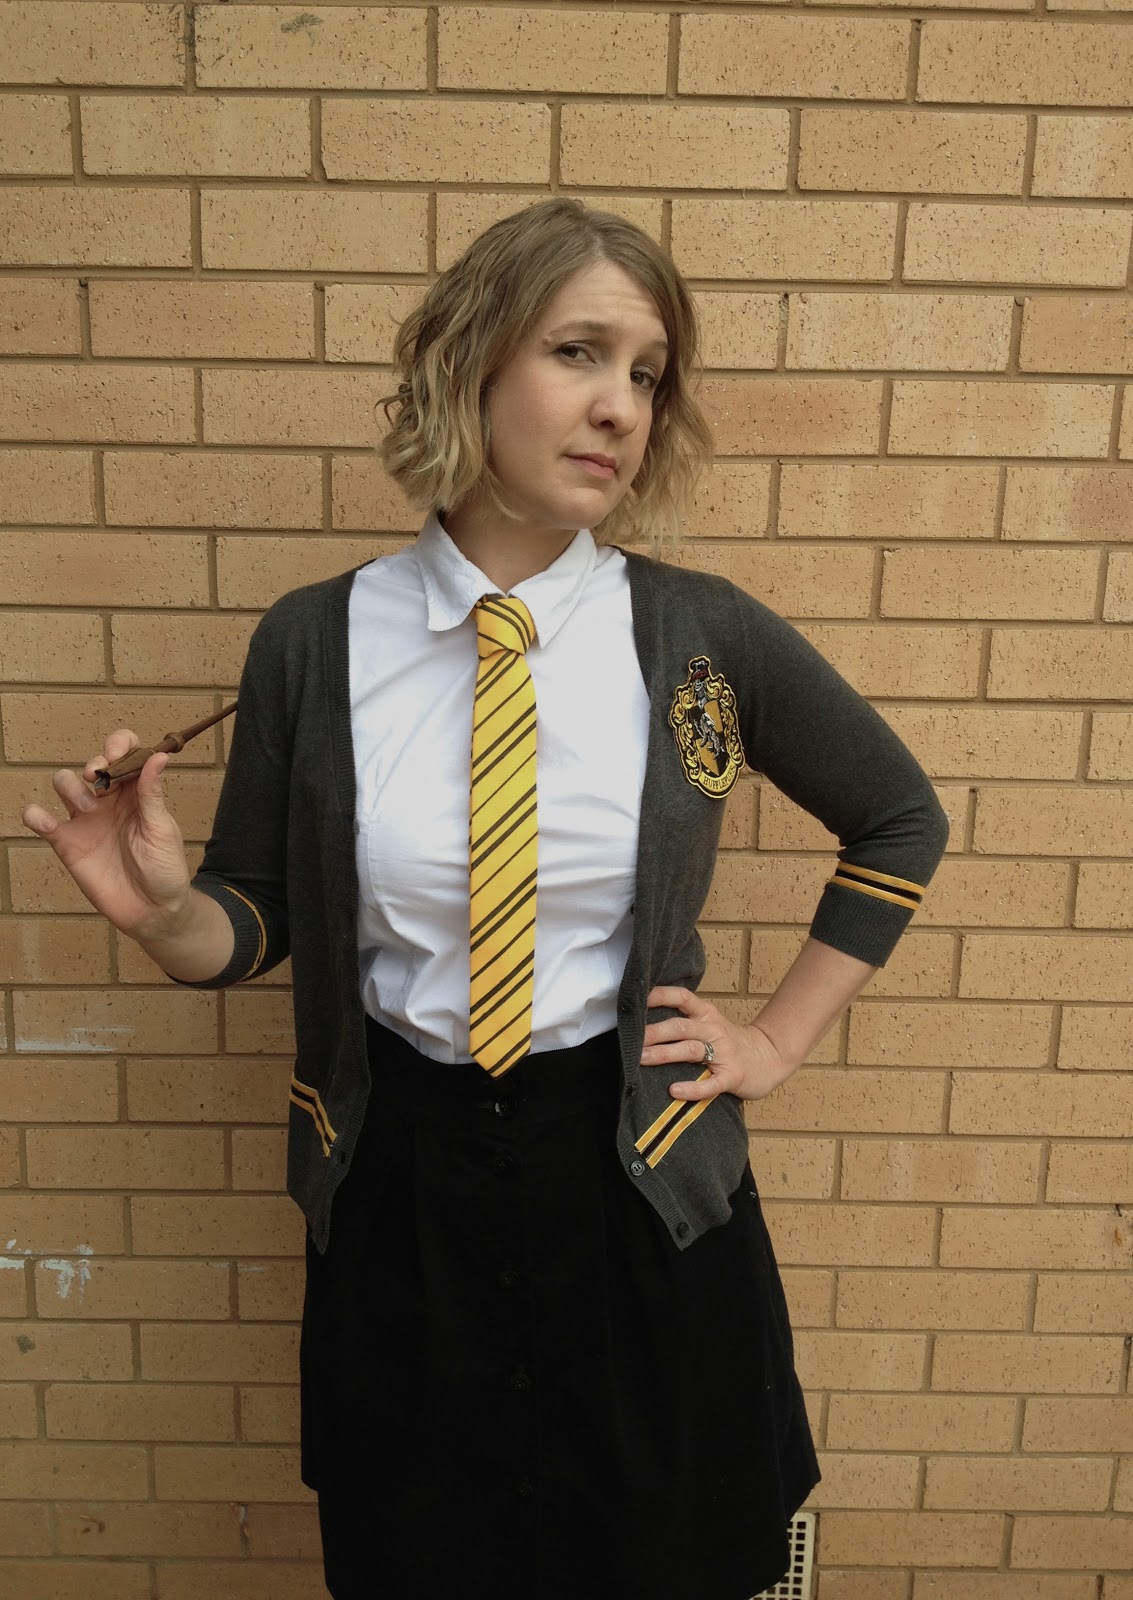 I went looking for a Hufflepuff tie online ($49 with postage? hells no)